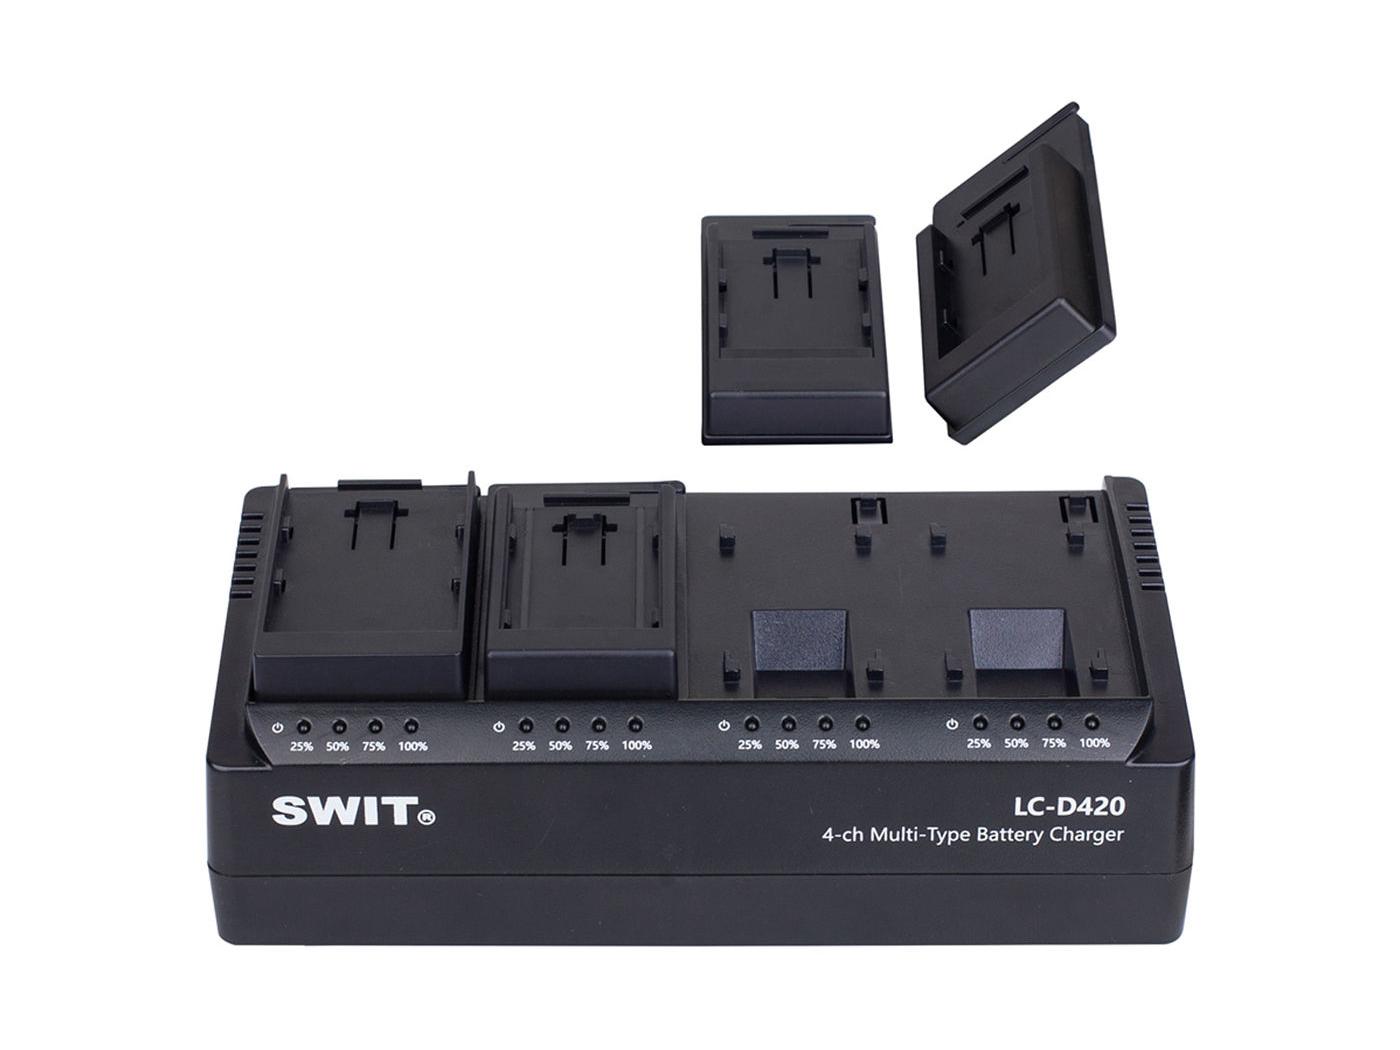 LC-D420i 4-ch Simultaneous DV battery Charger for S-8i50/S-8i75/JVC SSL-JVC50/JVC75 by SWIT